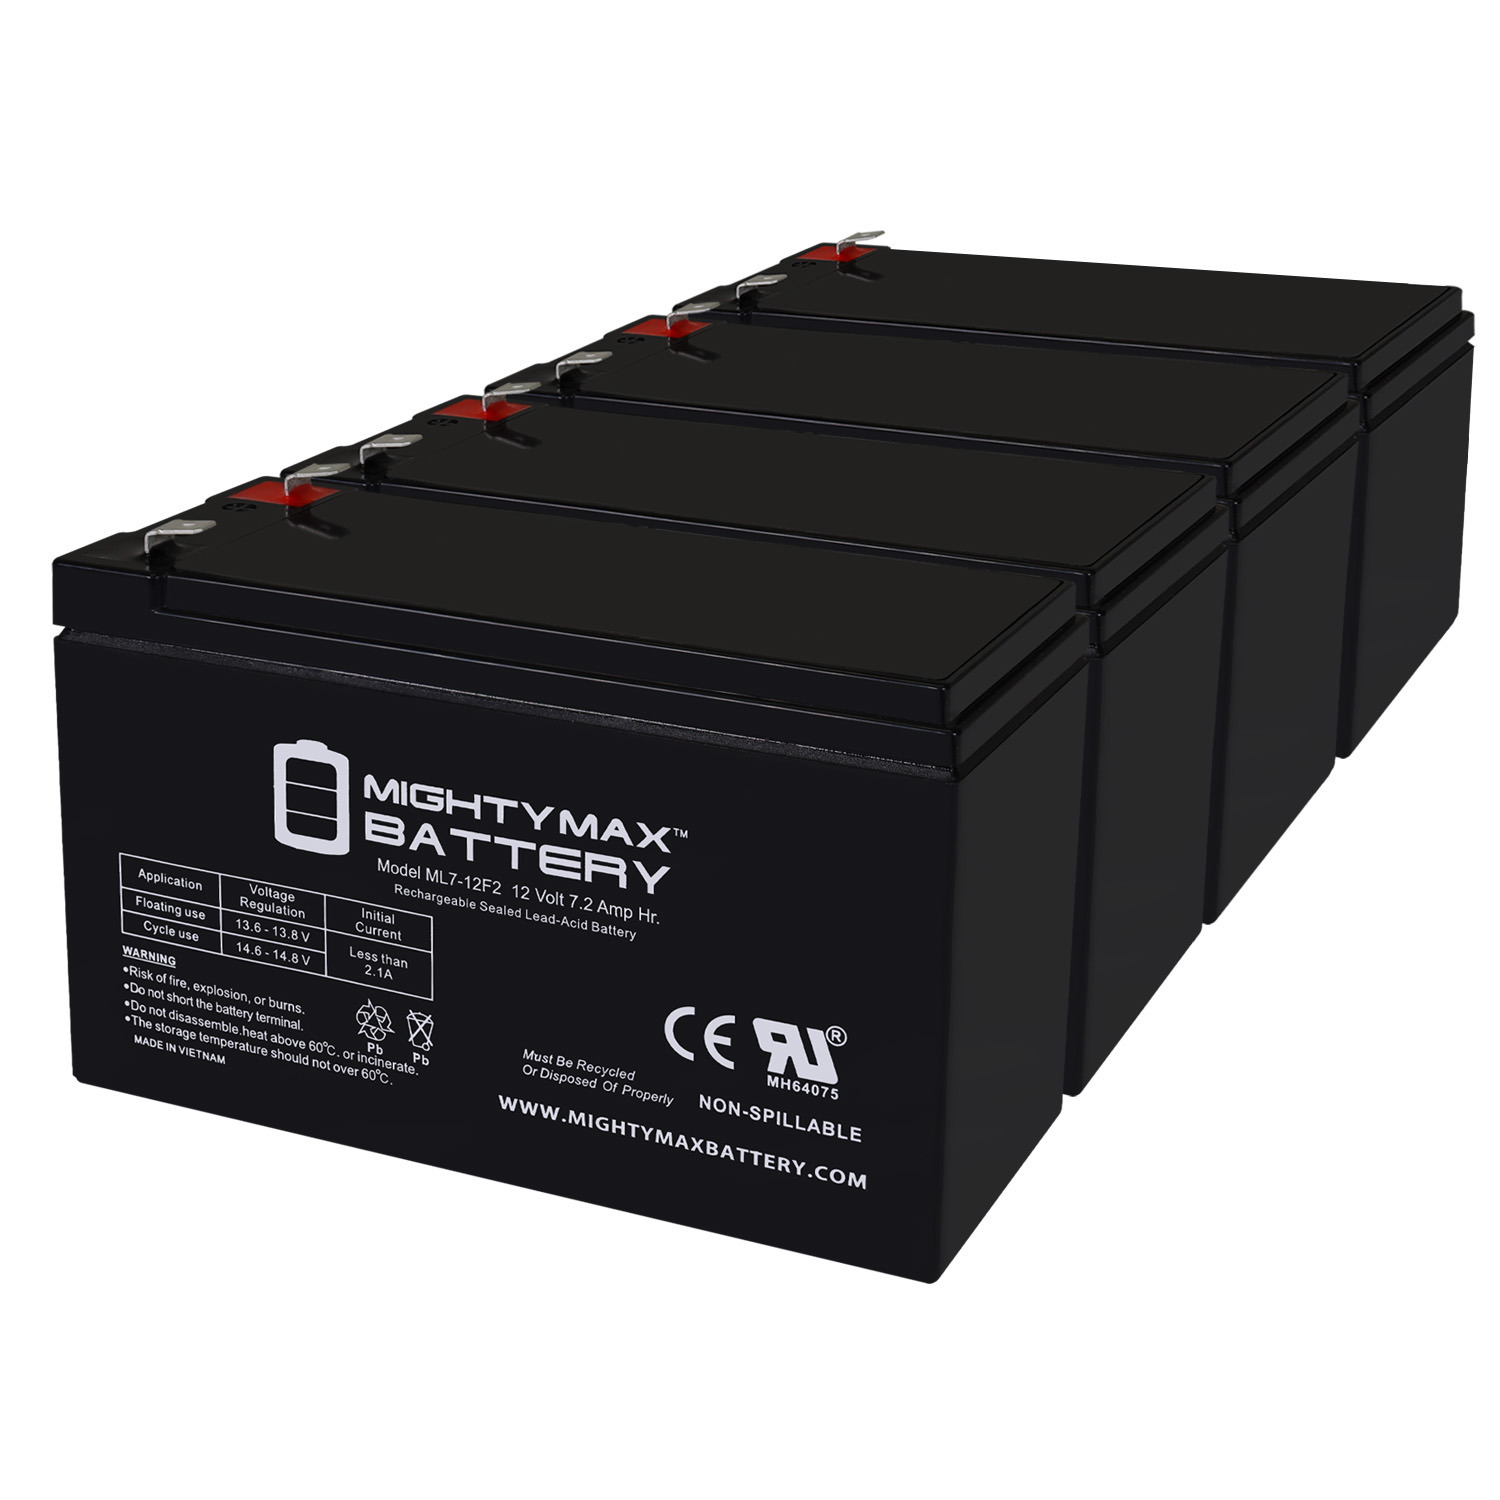 12V 7Ah F2 Replacement Battery for Hps12-28w - 4 Pack